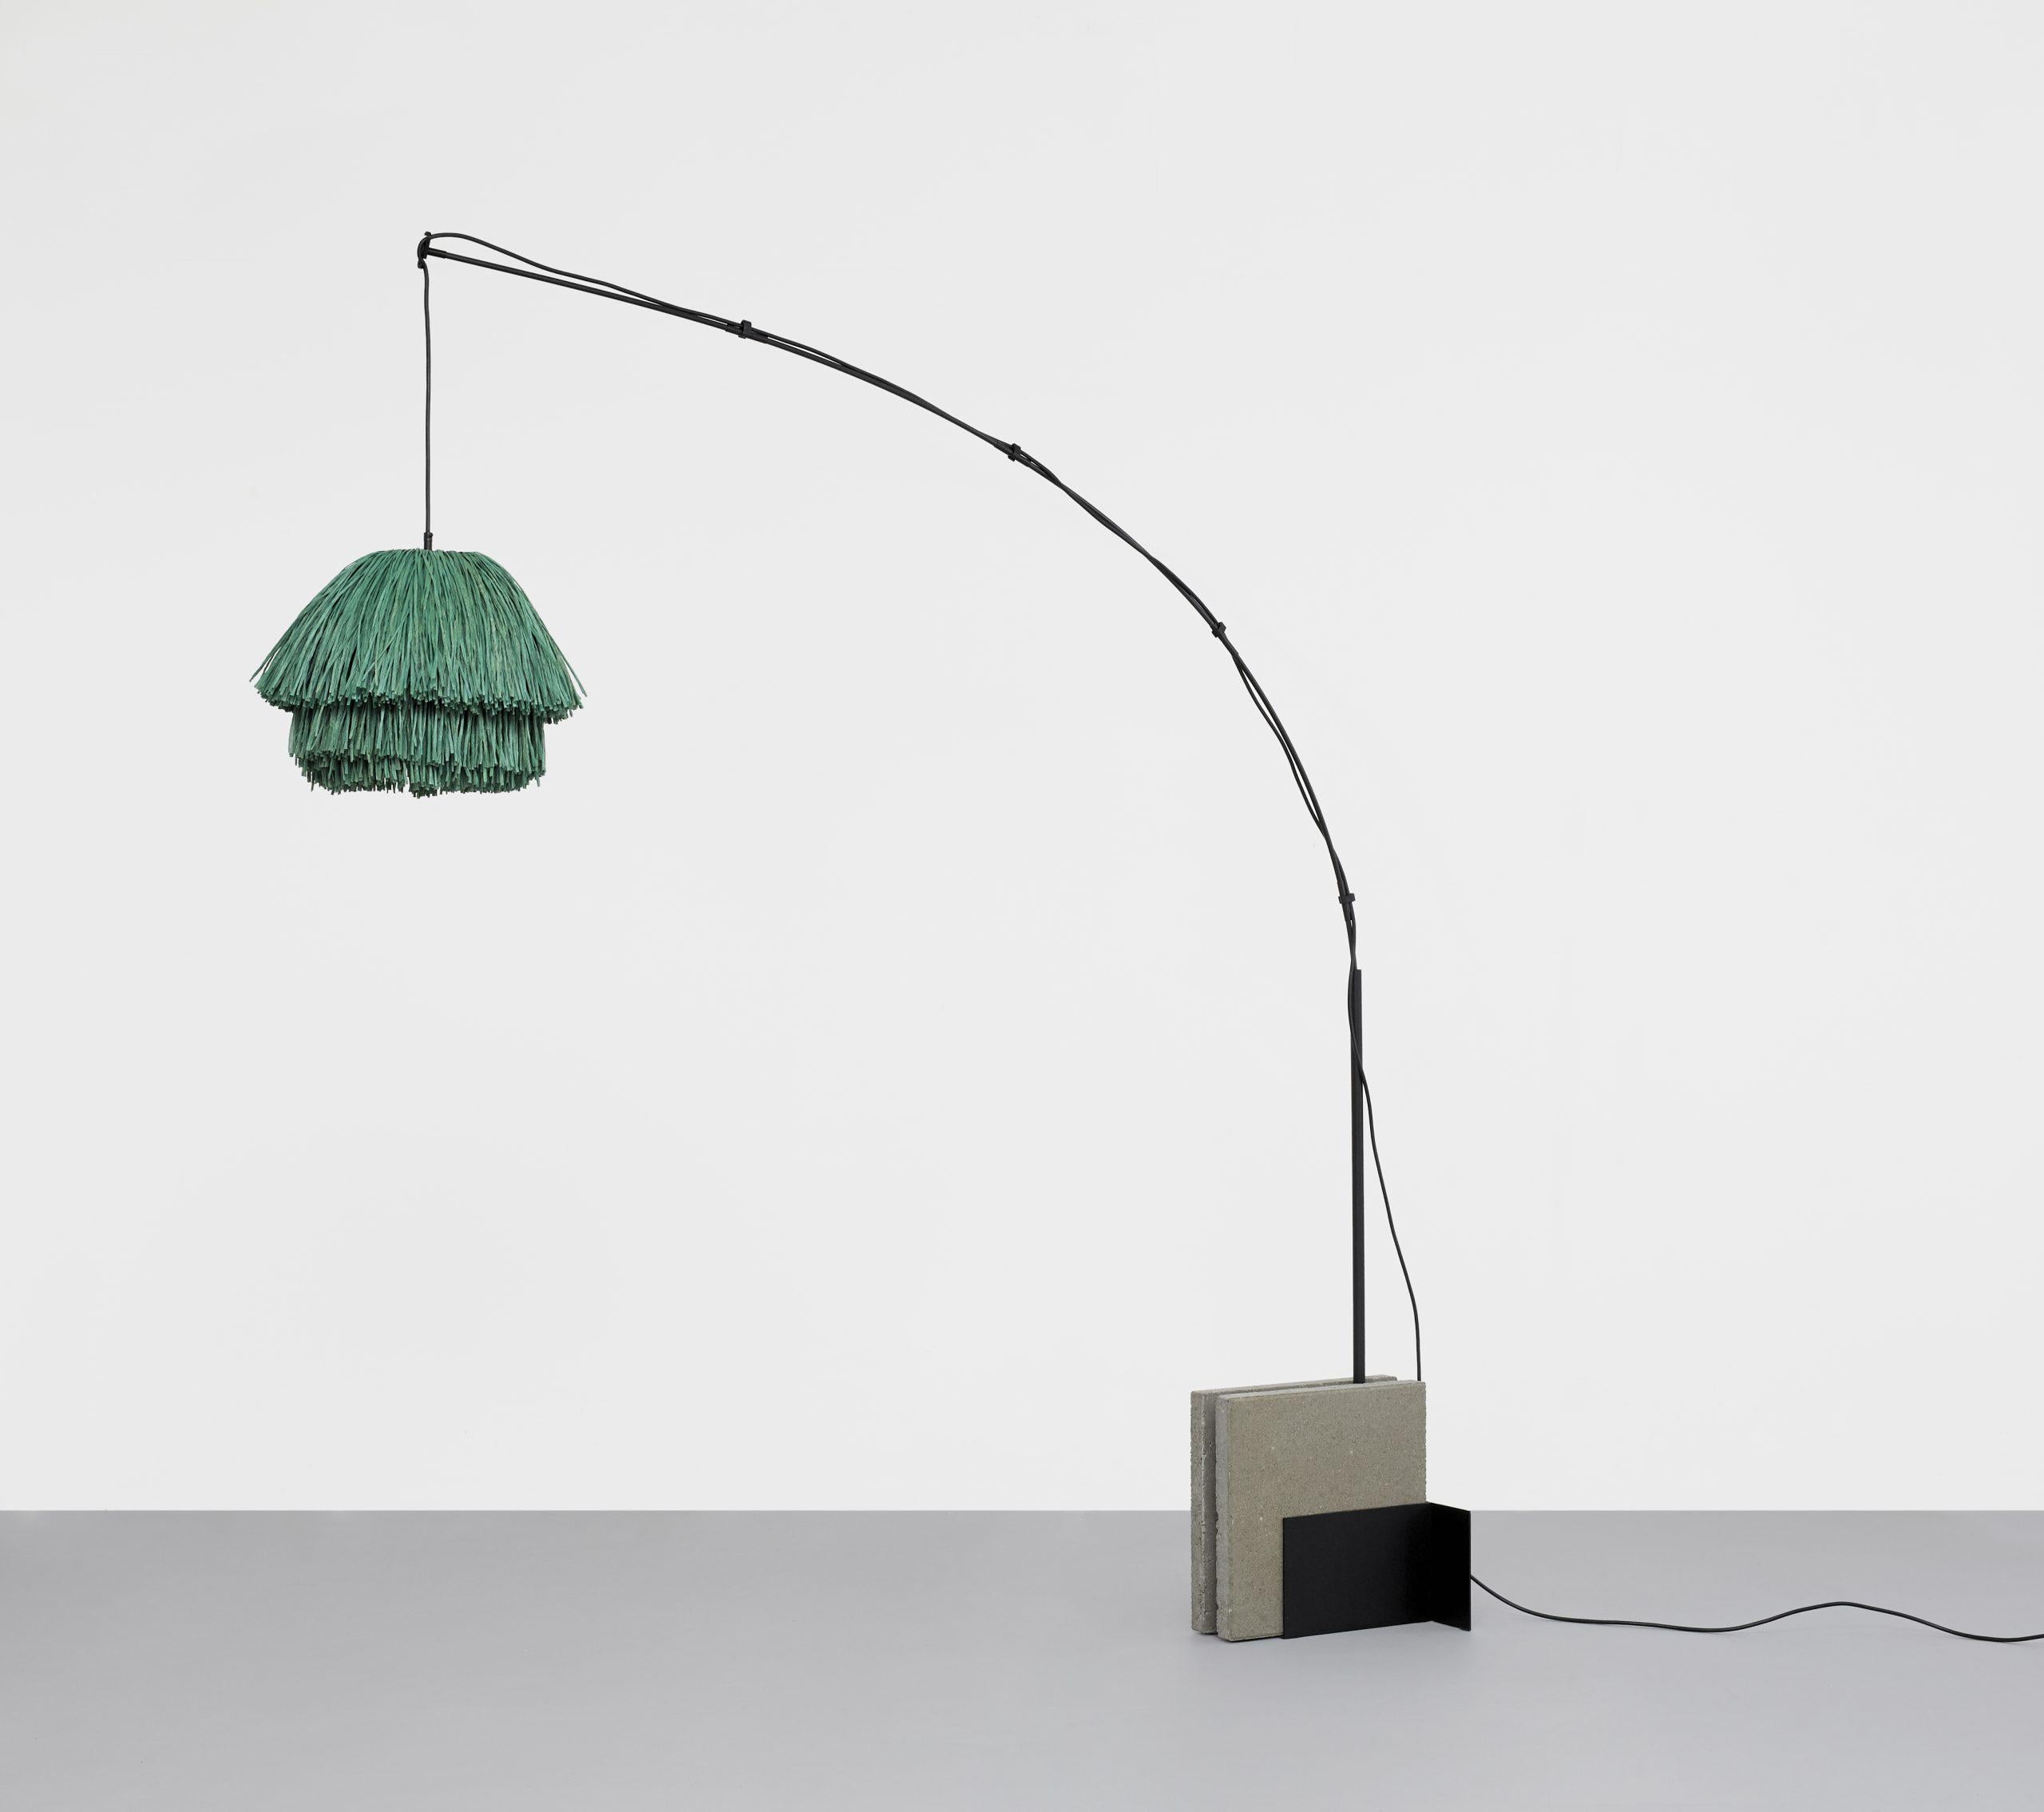 Green Fran S stand floor lamp by Llot Llov
Handcrafted light object
Dimensions: D 40 x W 205.8 x H 250 cm
Materials: raffia fringes, glass fiber, steel, concrete
Colour: green
Also available in beige, coral, black.

Another member of the FRAN